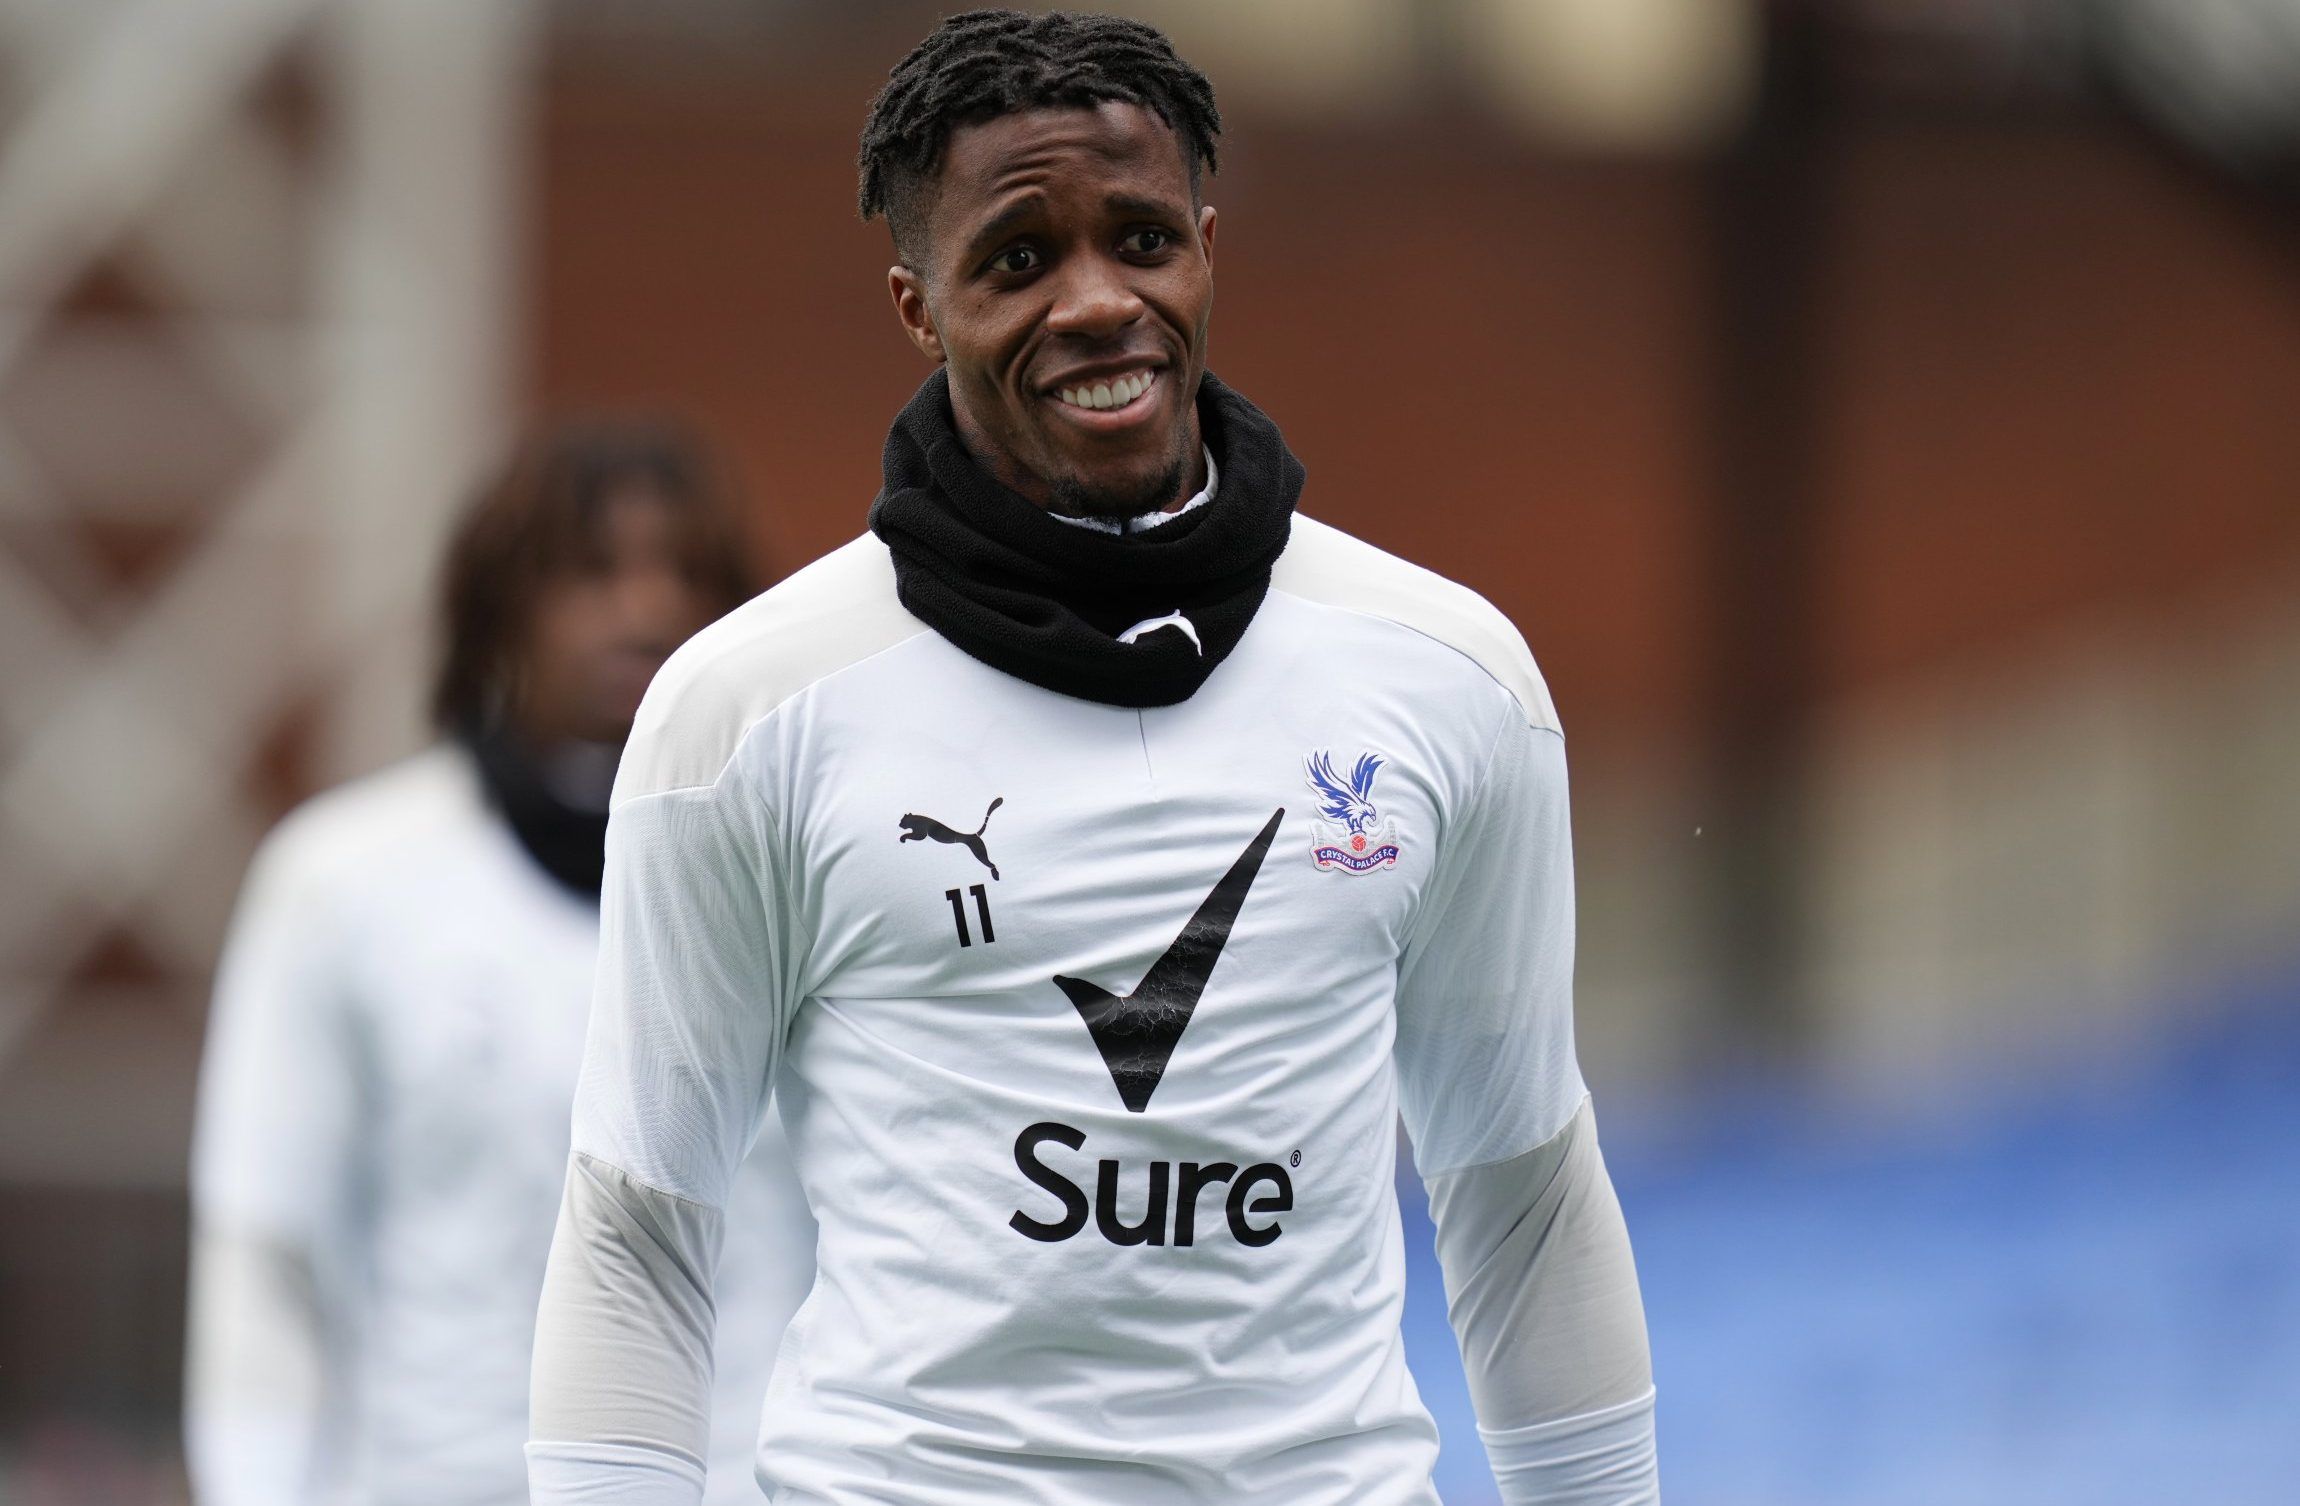 crystal palace forward wilfried zaha during warm up against aston villa in the premier league